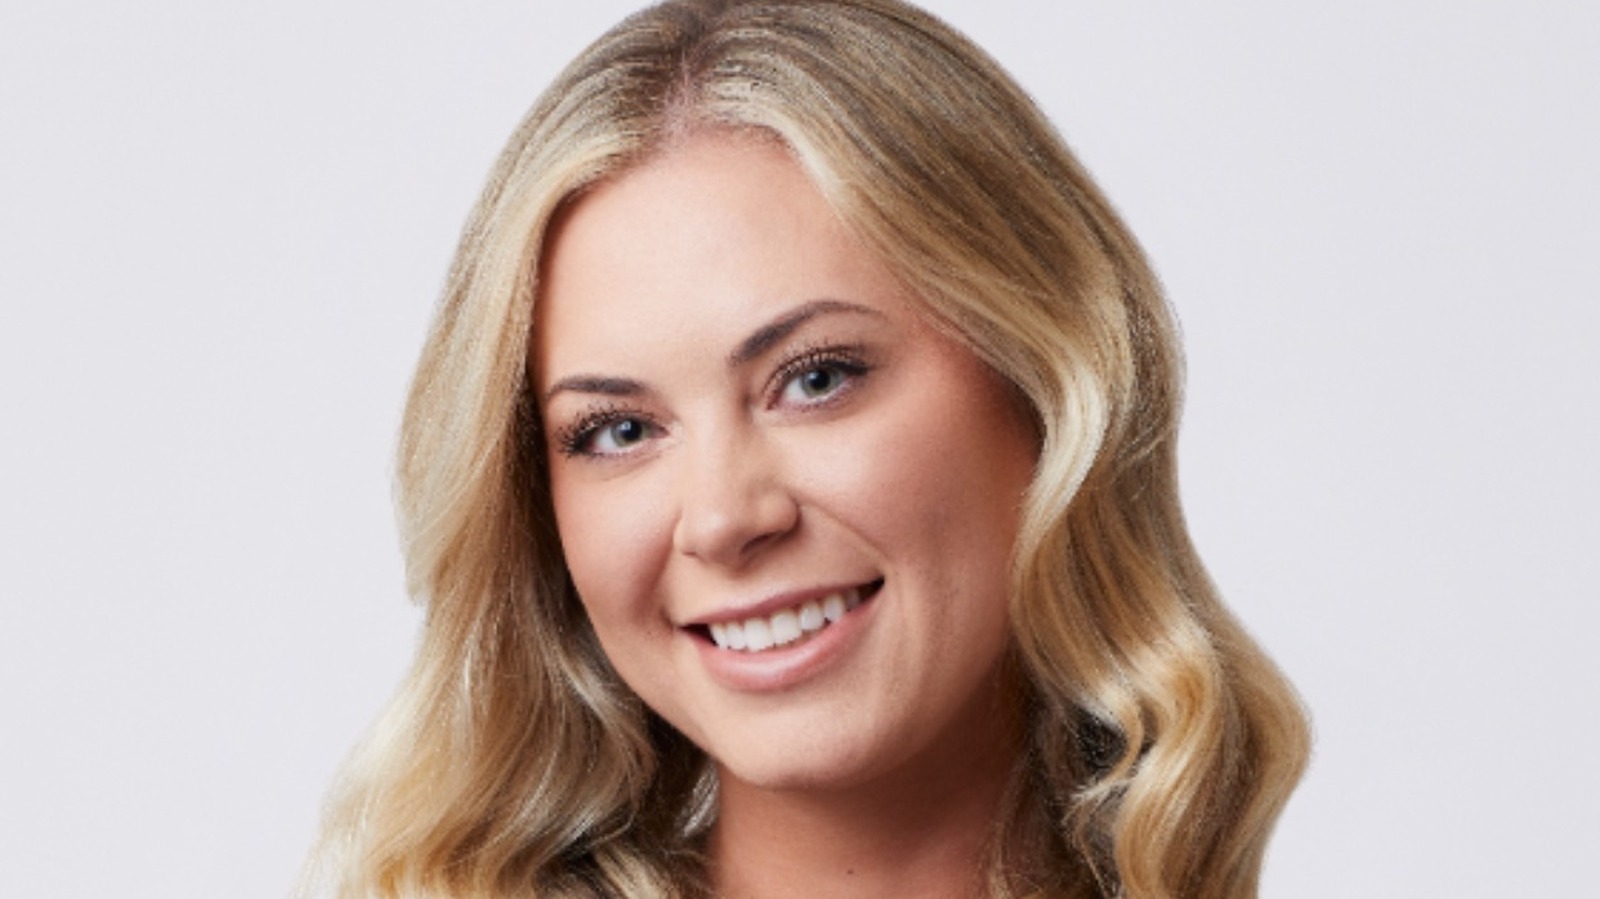 The Truth About Bachelor Contestant Cassidy Timbrooks